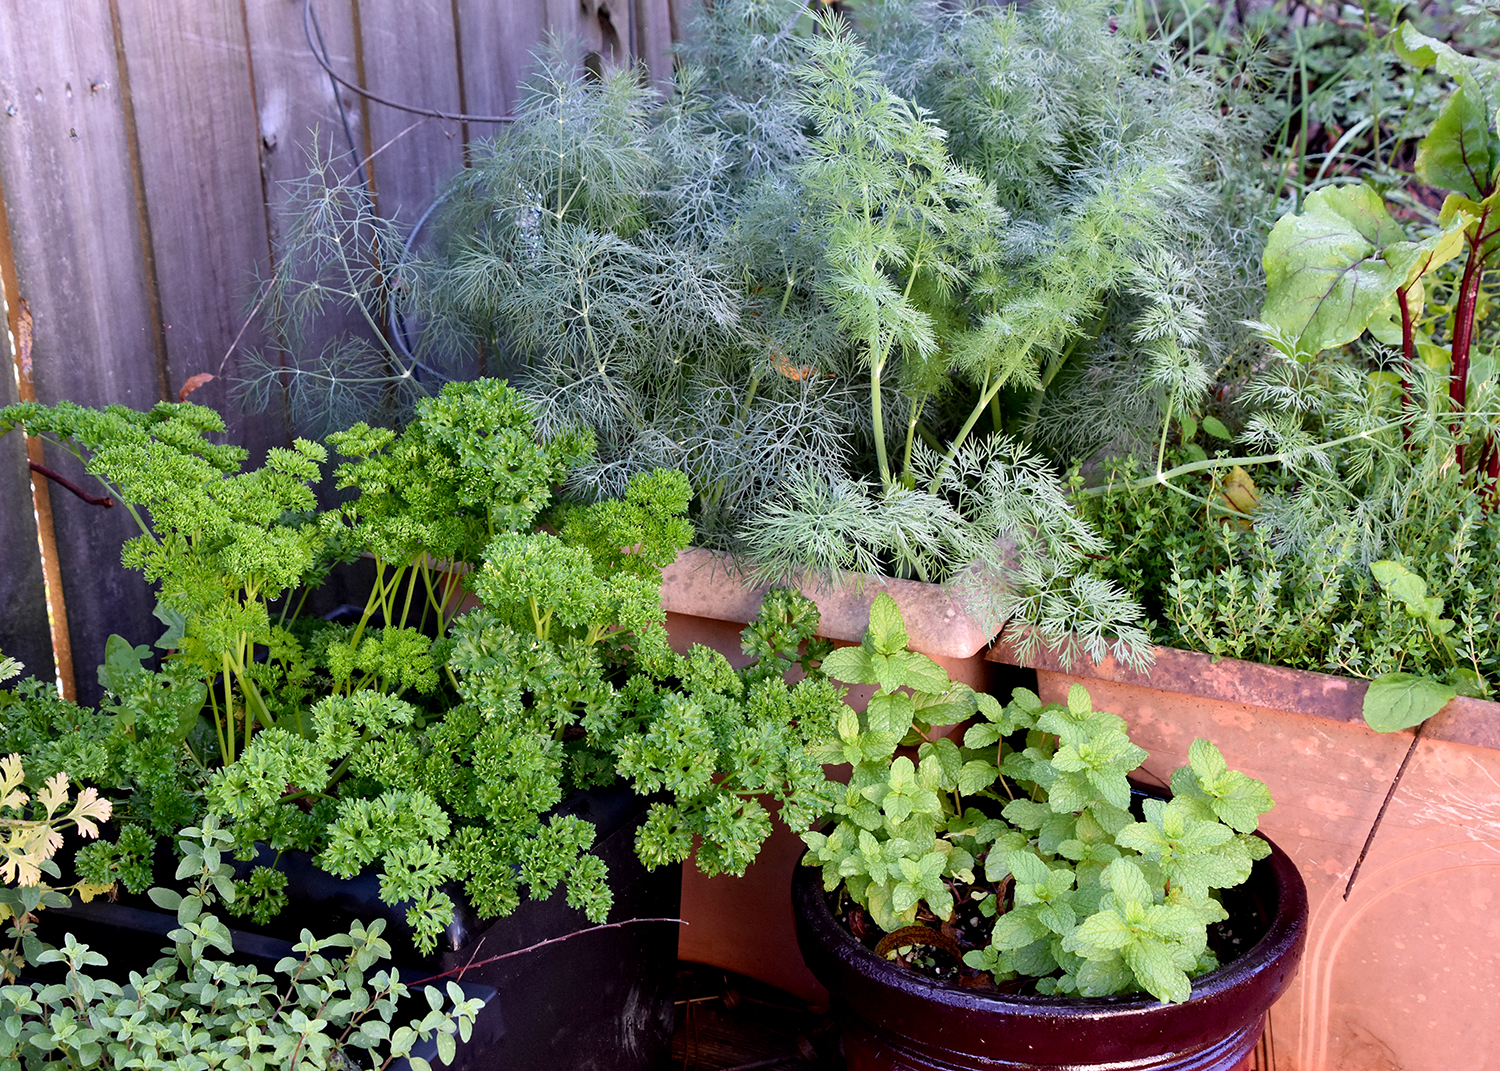 Various herbs in containers.